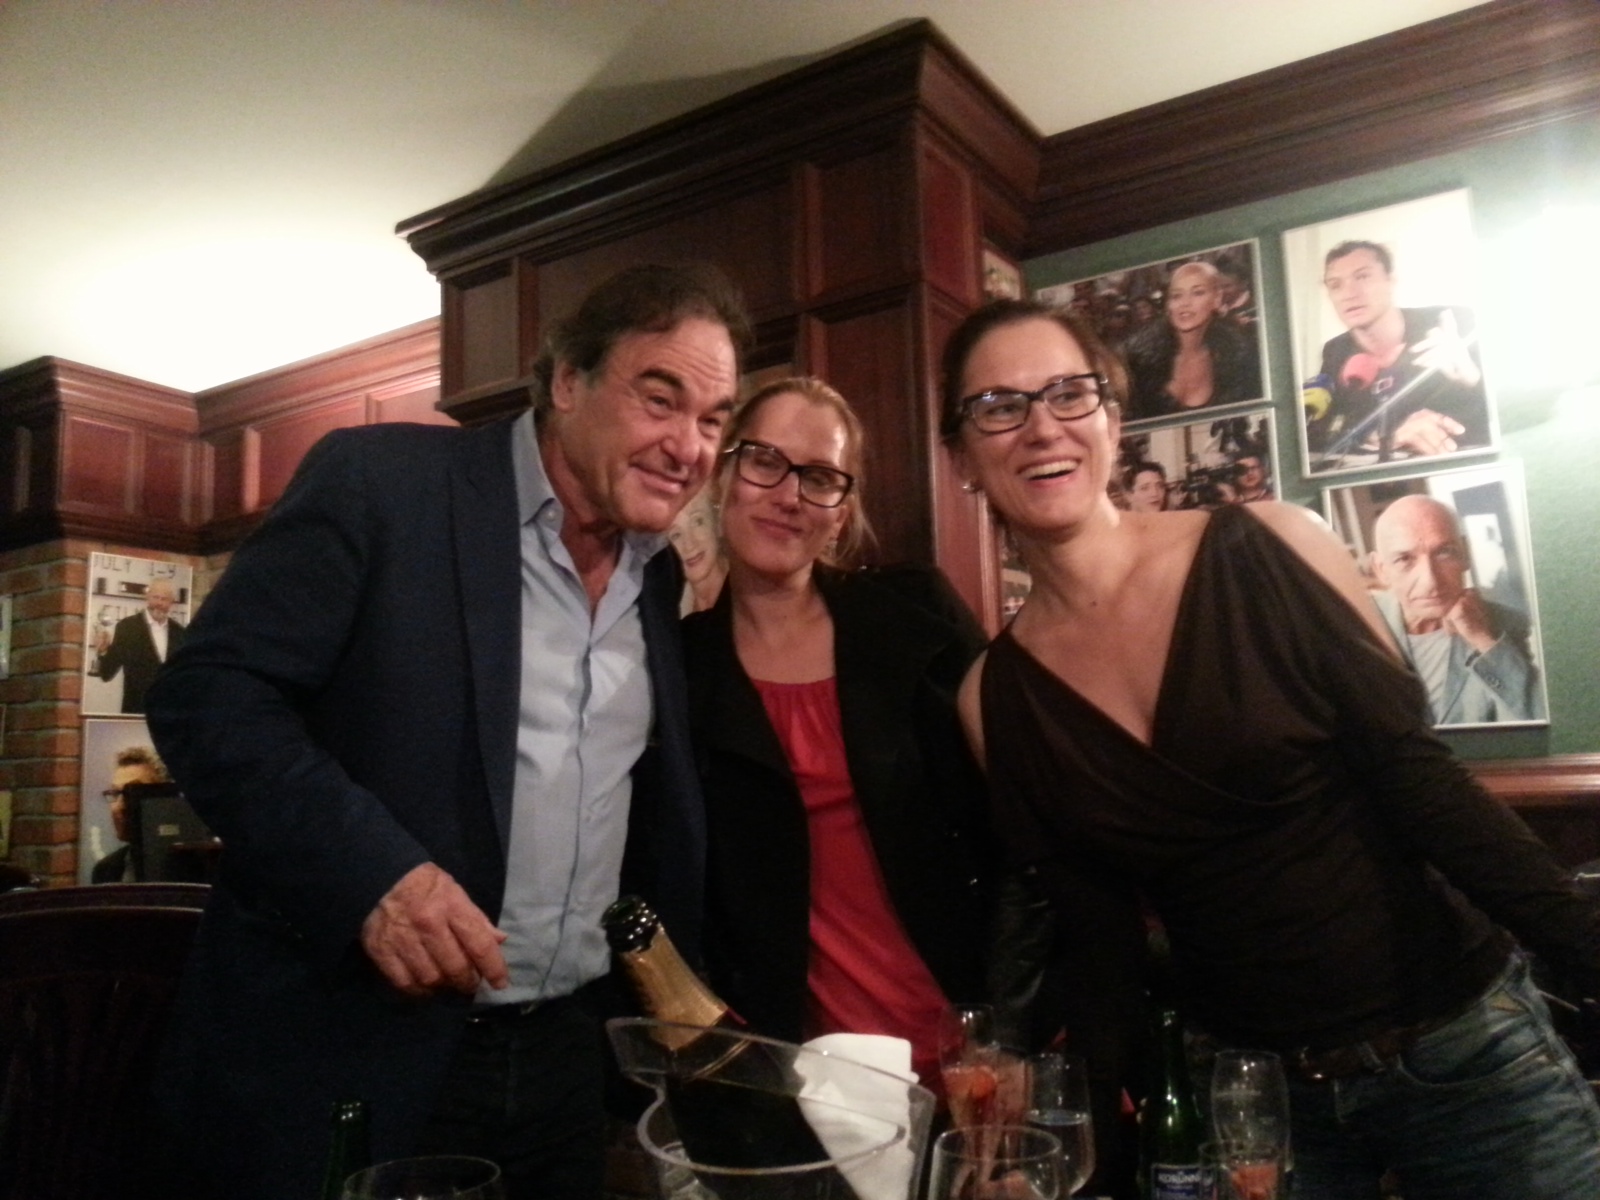 Director Oliver Stone with the producer duo Jitka and Katerina Bartu